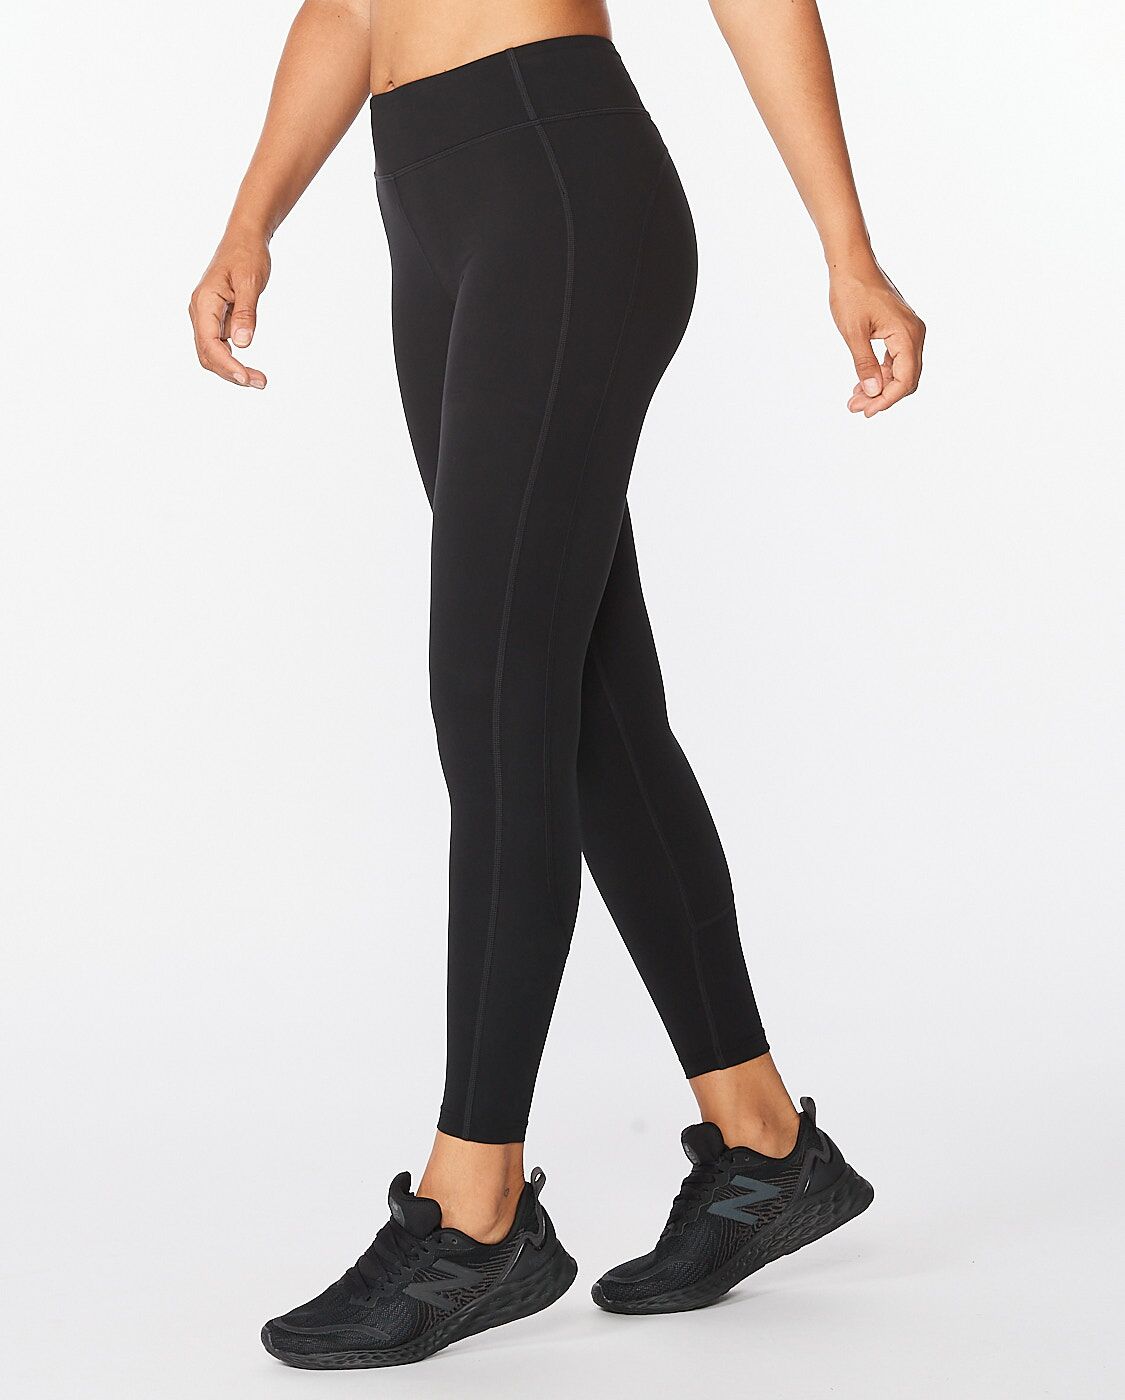 2XU South Africa - Womens Form Mid-Rise Compression Tights - Black/Silver